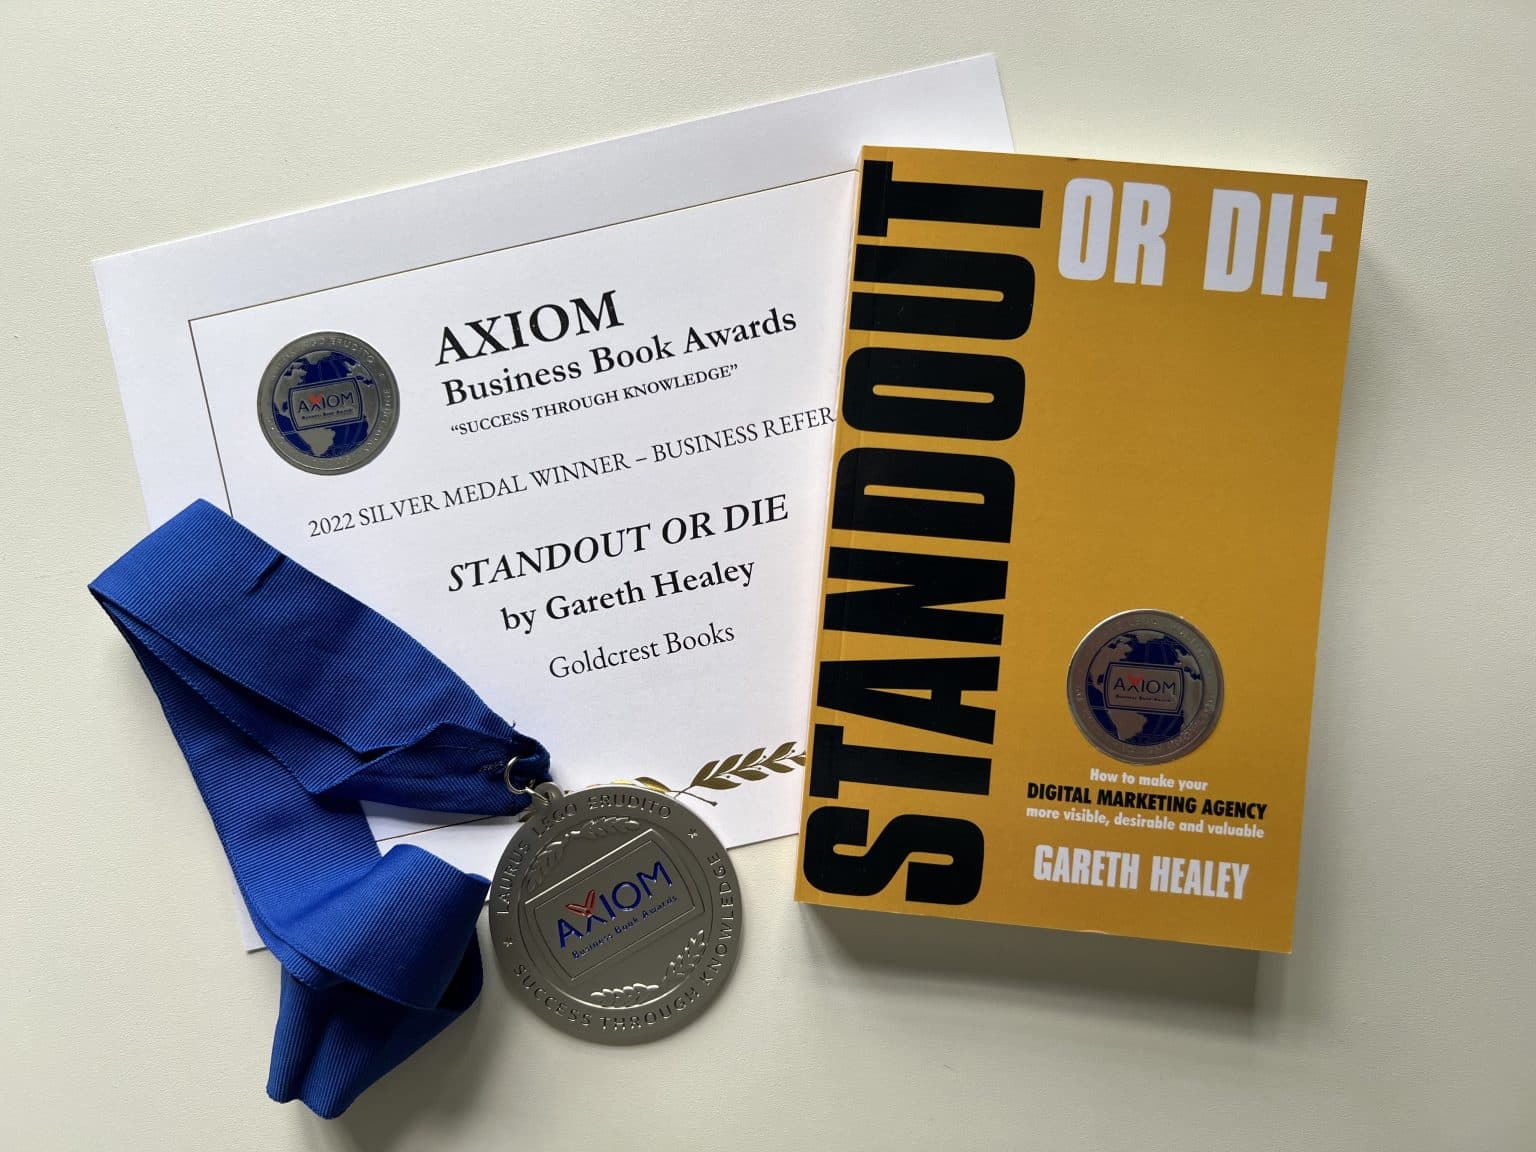 Image of STANDOUT OR DIE book, certificate and silver medal